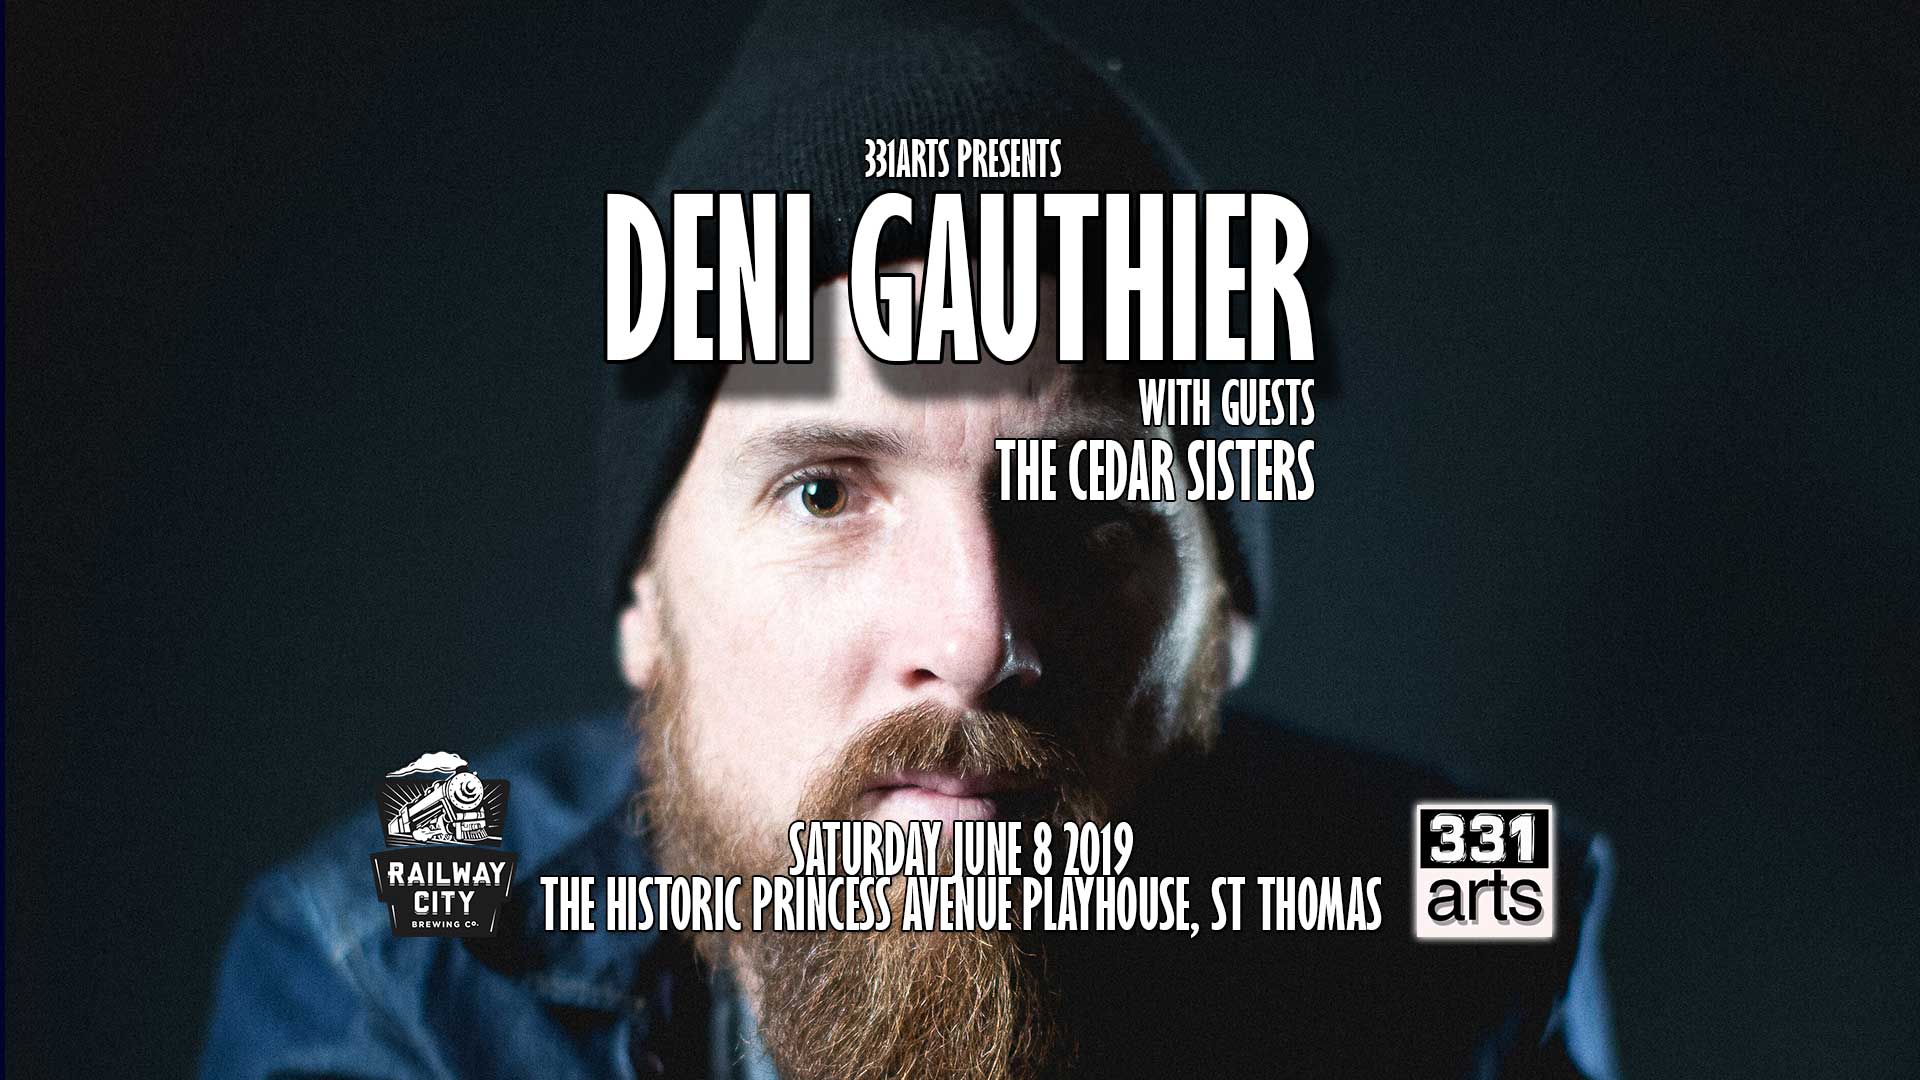 Deni Gauthier with guests The Cedar Sisters